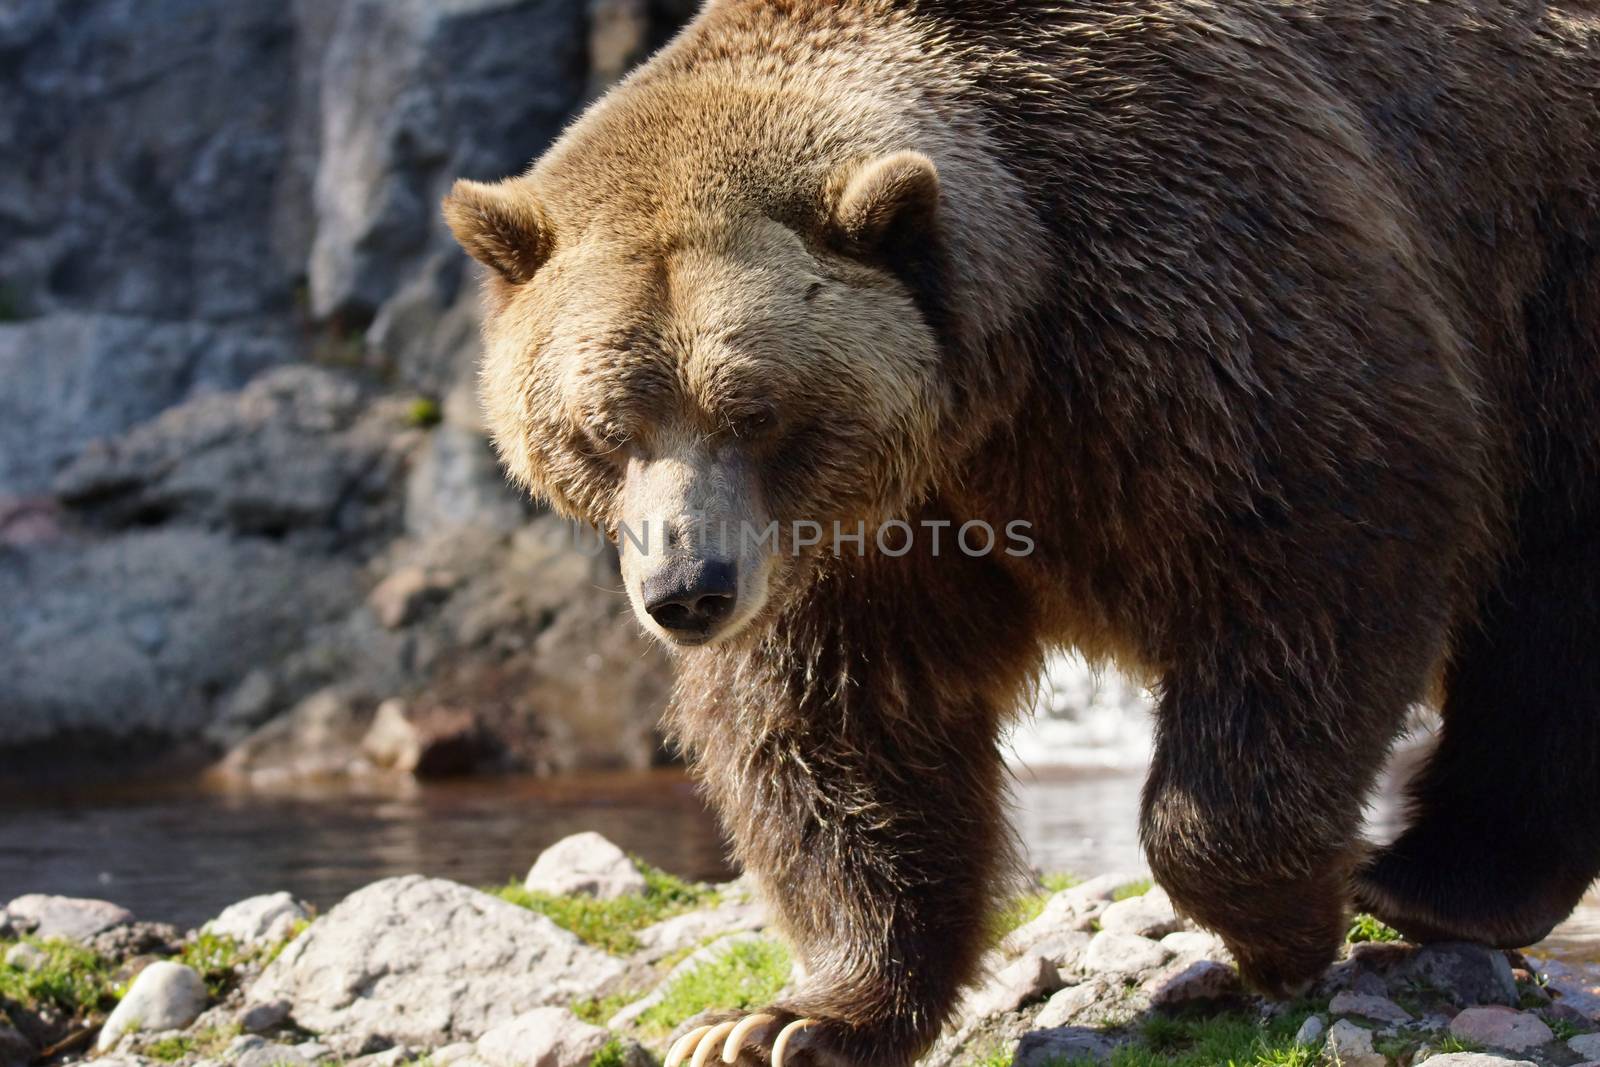 Big grizzly bear walking by Mirage3